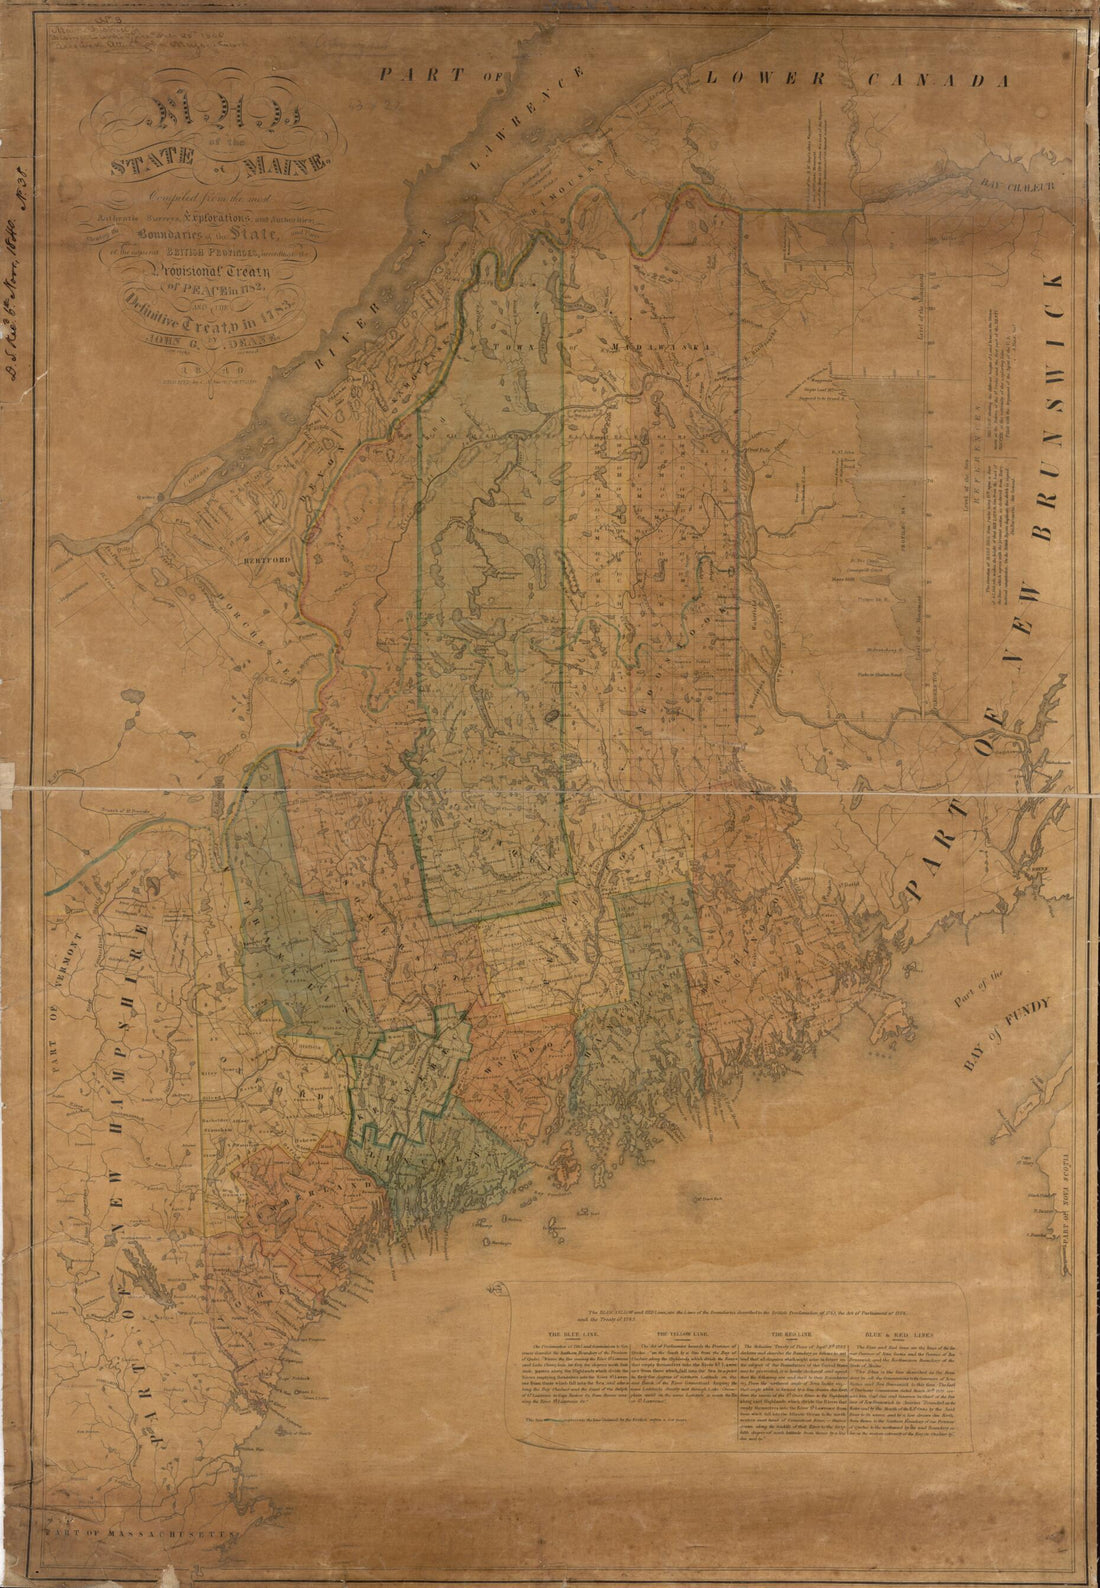 This old map of Map of the State of Maine from 1840 was created by John G. (John Gilmore) Deane in 1840